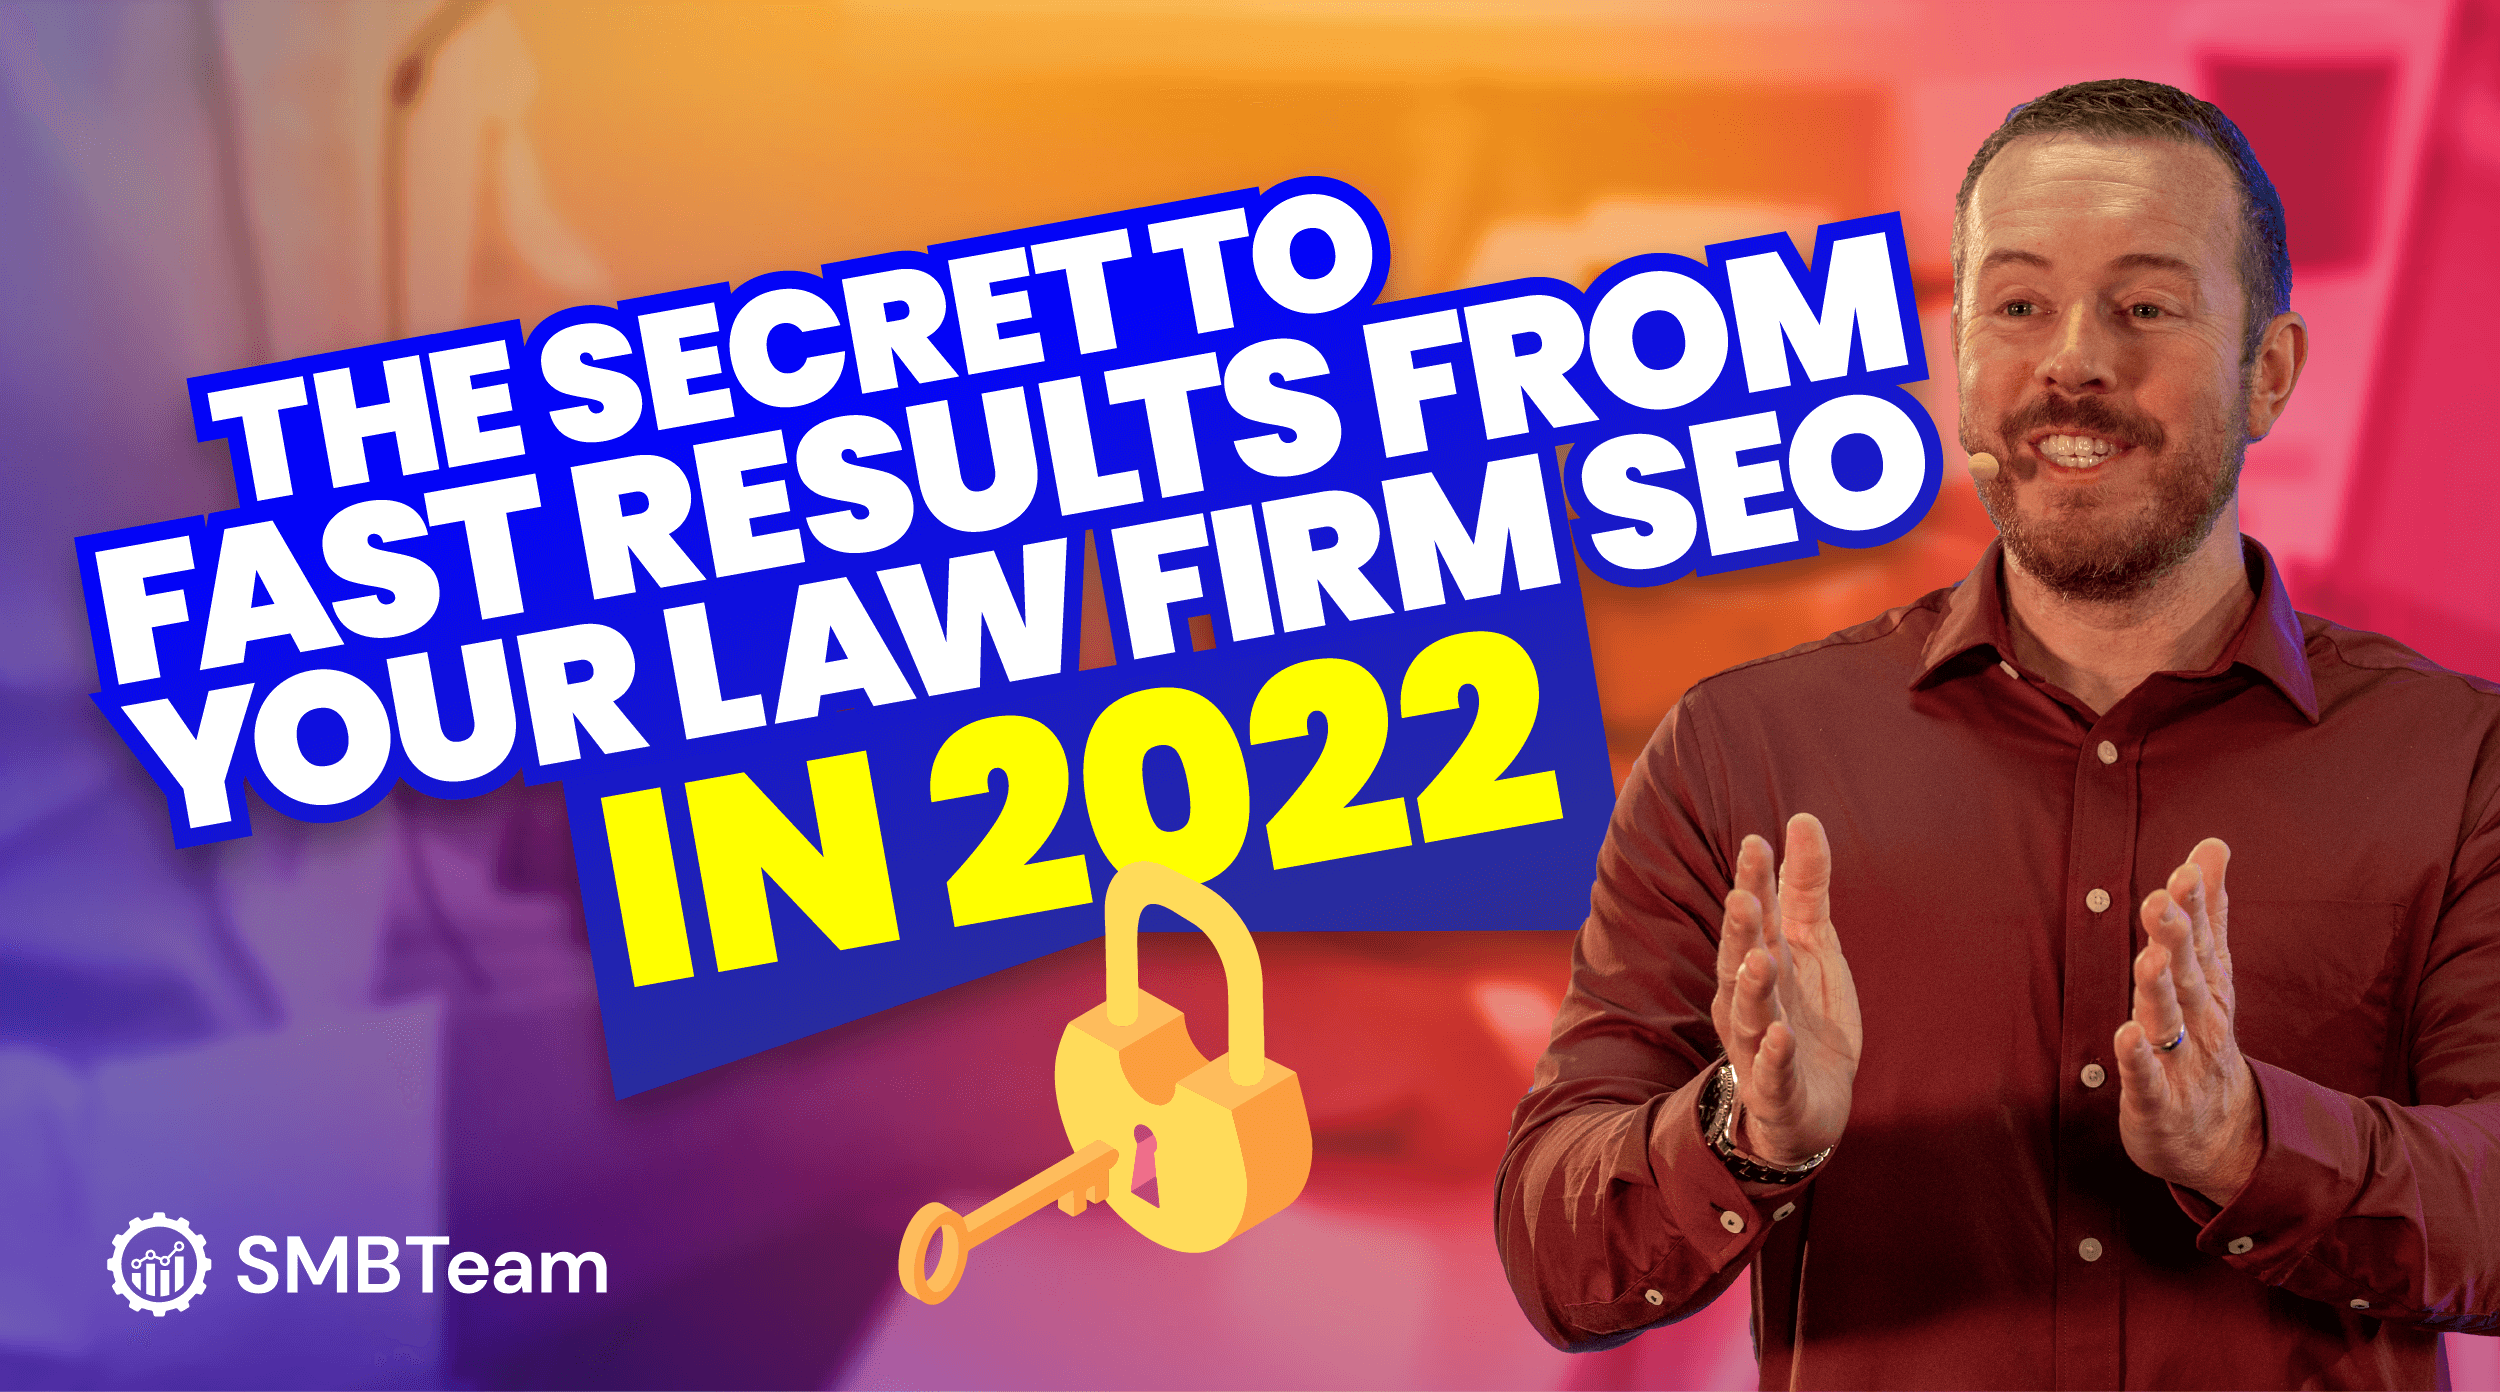 The Secret to Fast Results From Your Law Firm SEO in 2022